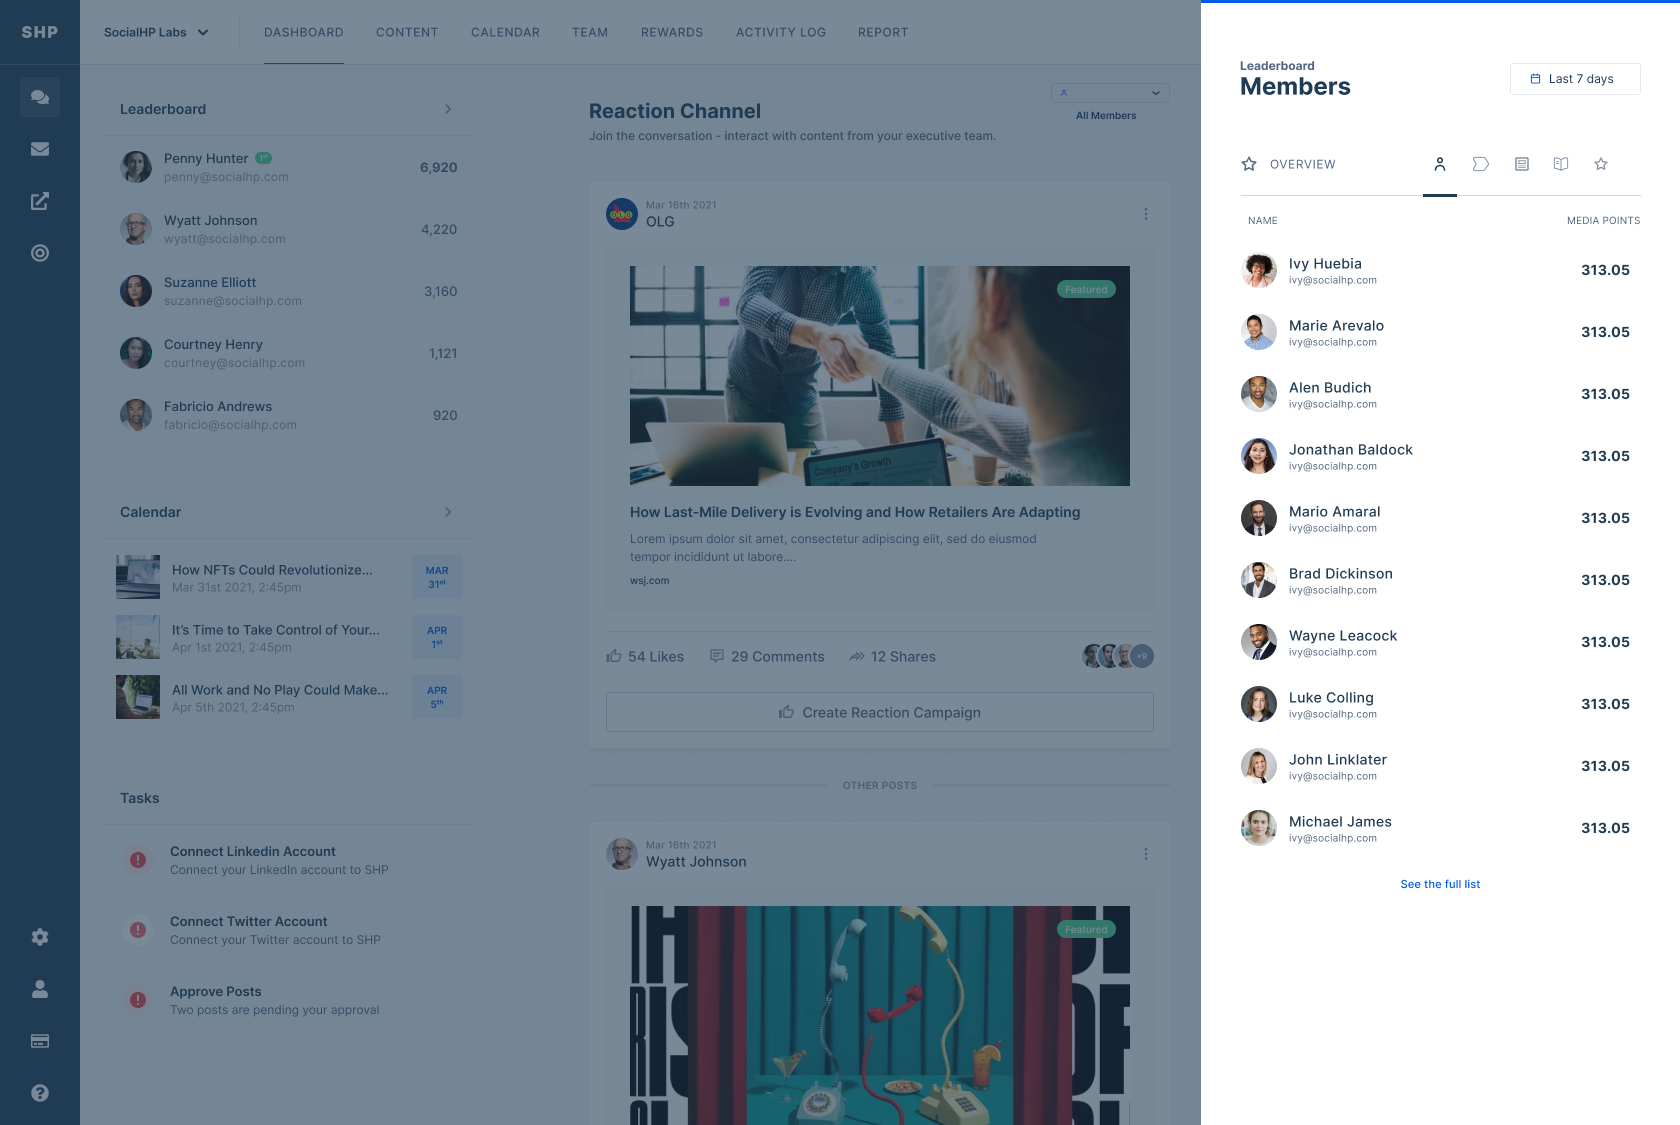 SocialHP is designed to build excitement and engagement. Employees can curate content, interact with their peers, and see how their social influence stacks up on the company leaderboard.